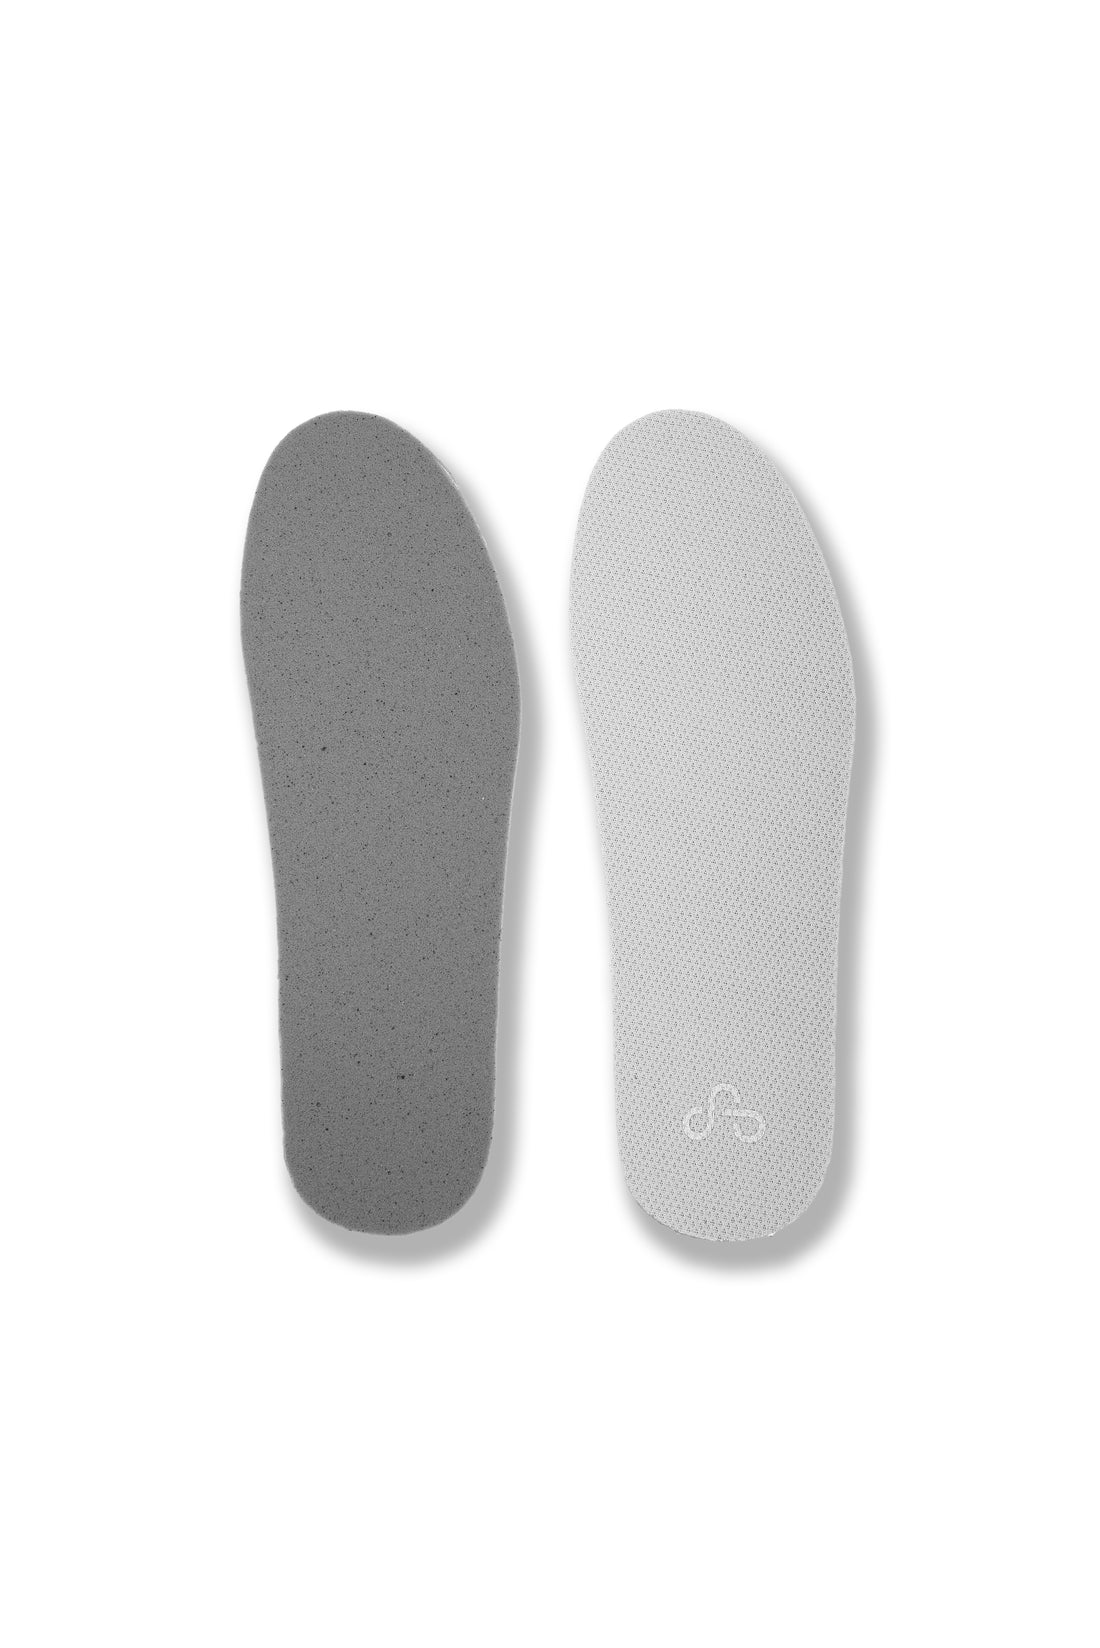 OAO SOFT INSOLE